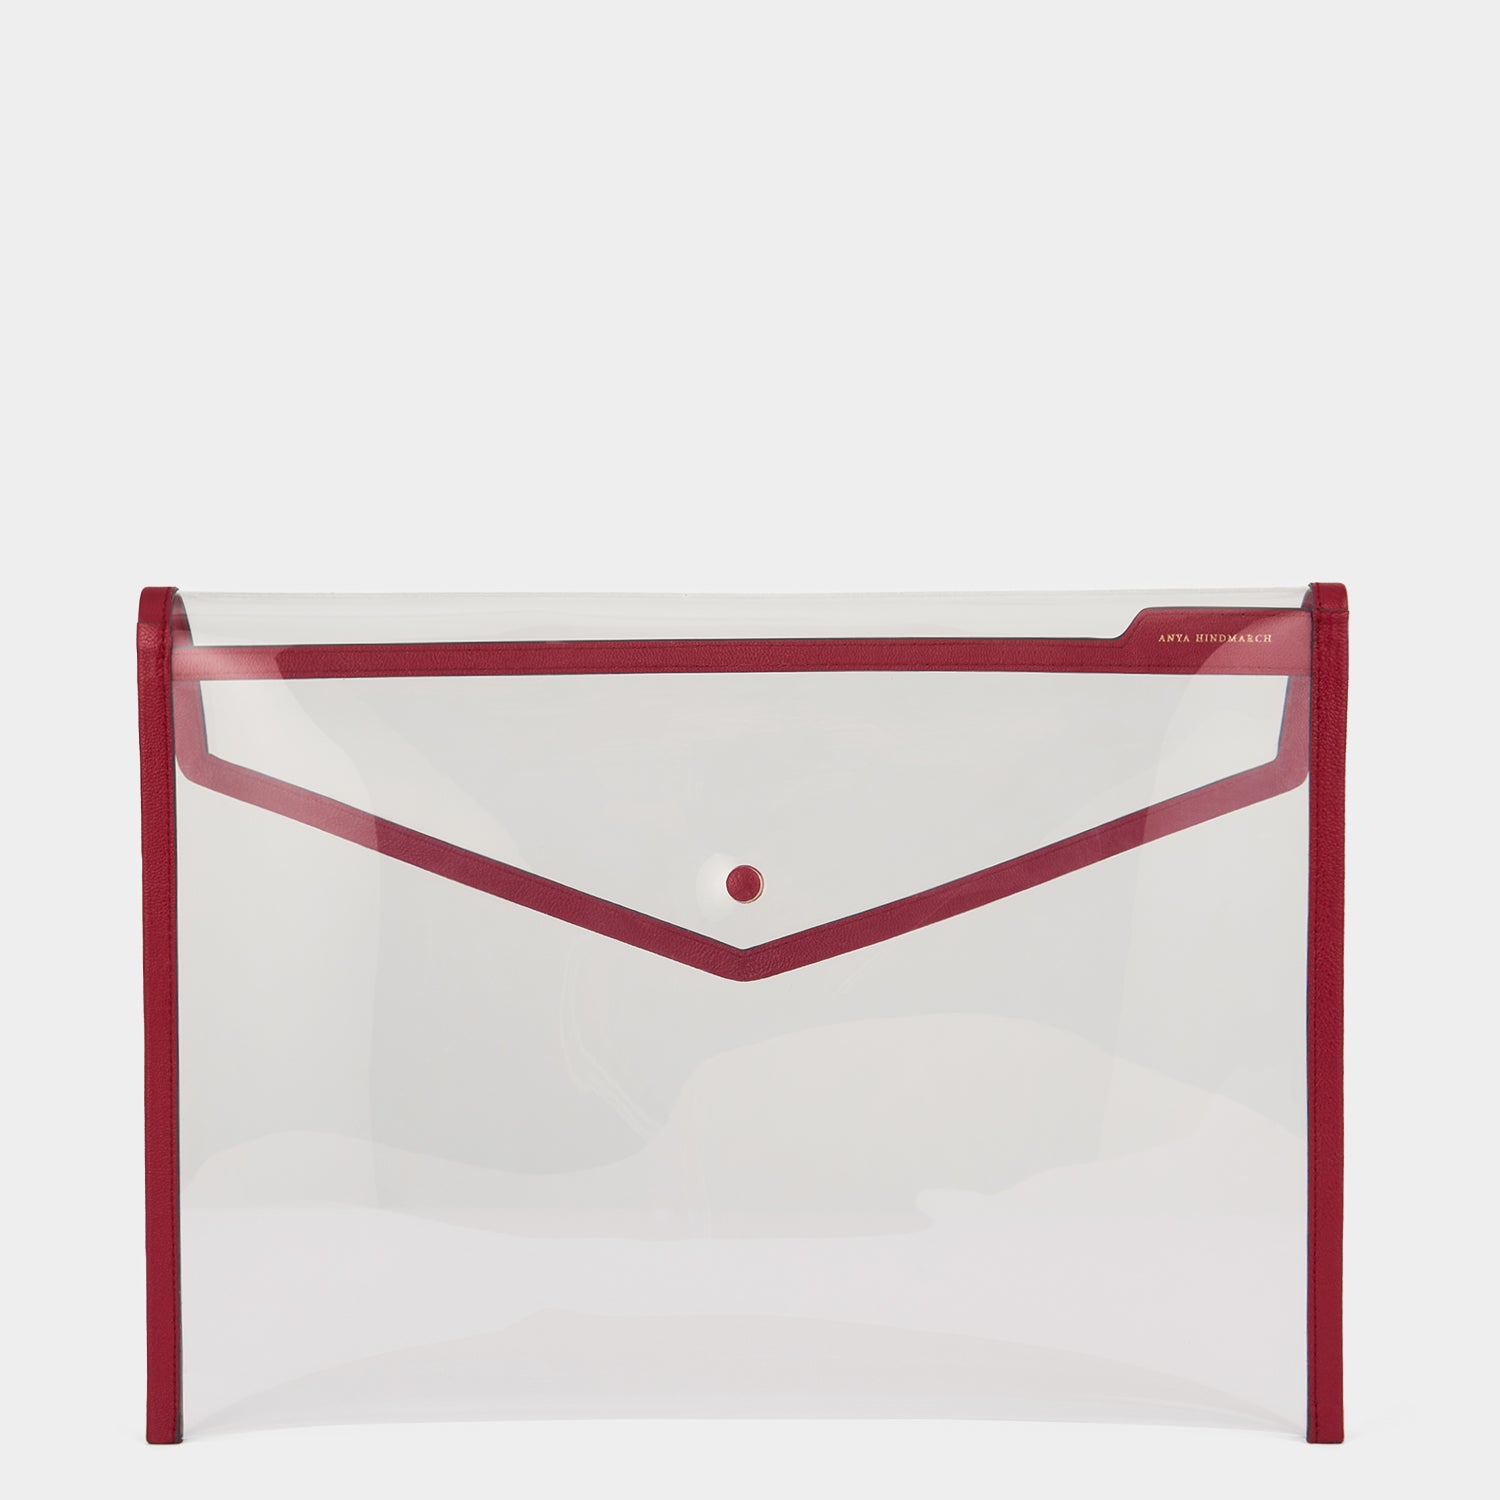 Files Envelope -

                  
                    Capra Leather in Red/Clear -
                  

                  Anya Hindmarch UK
